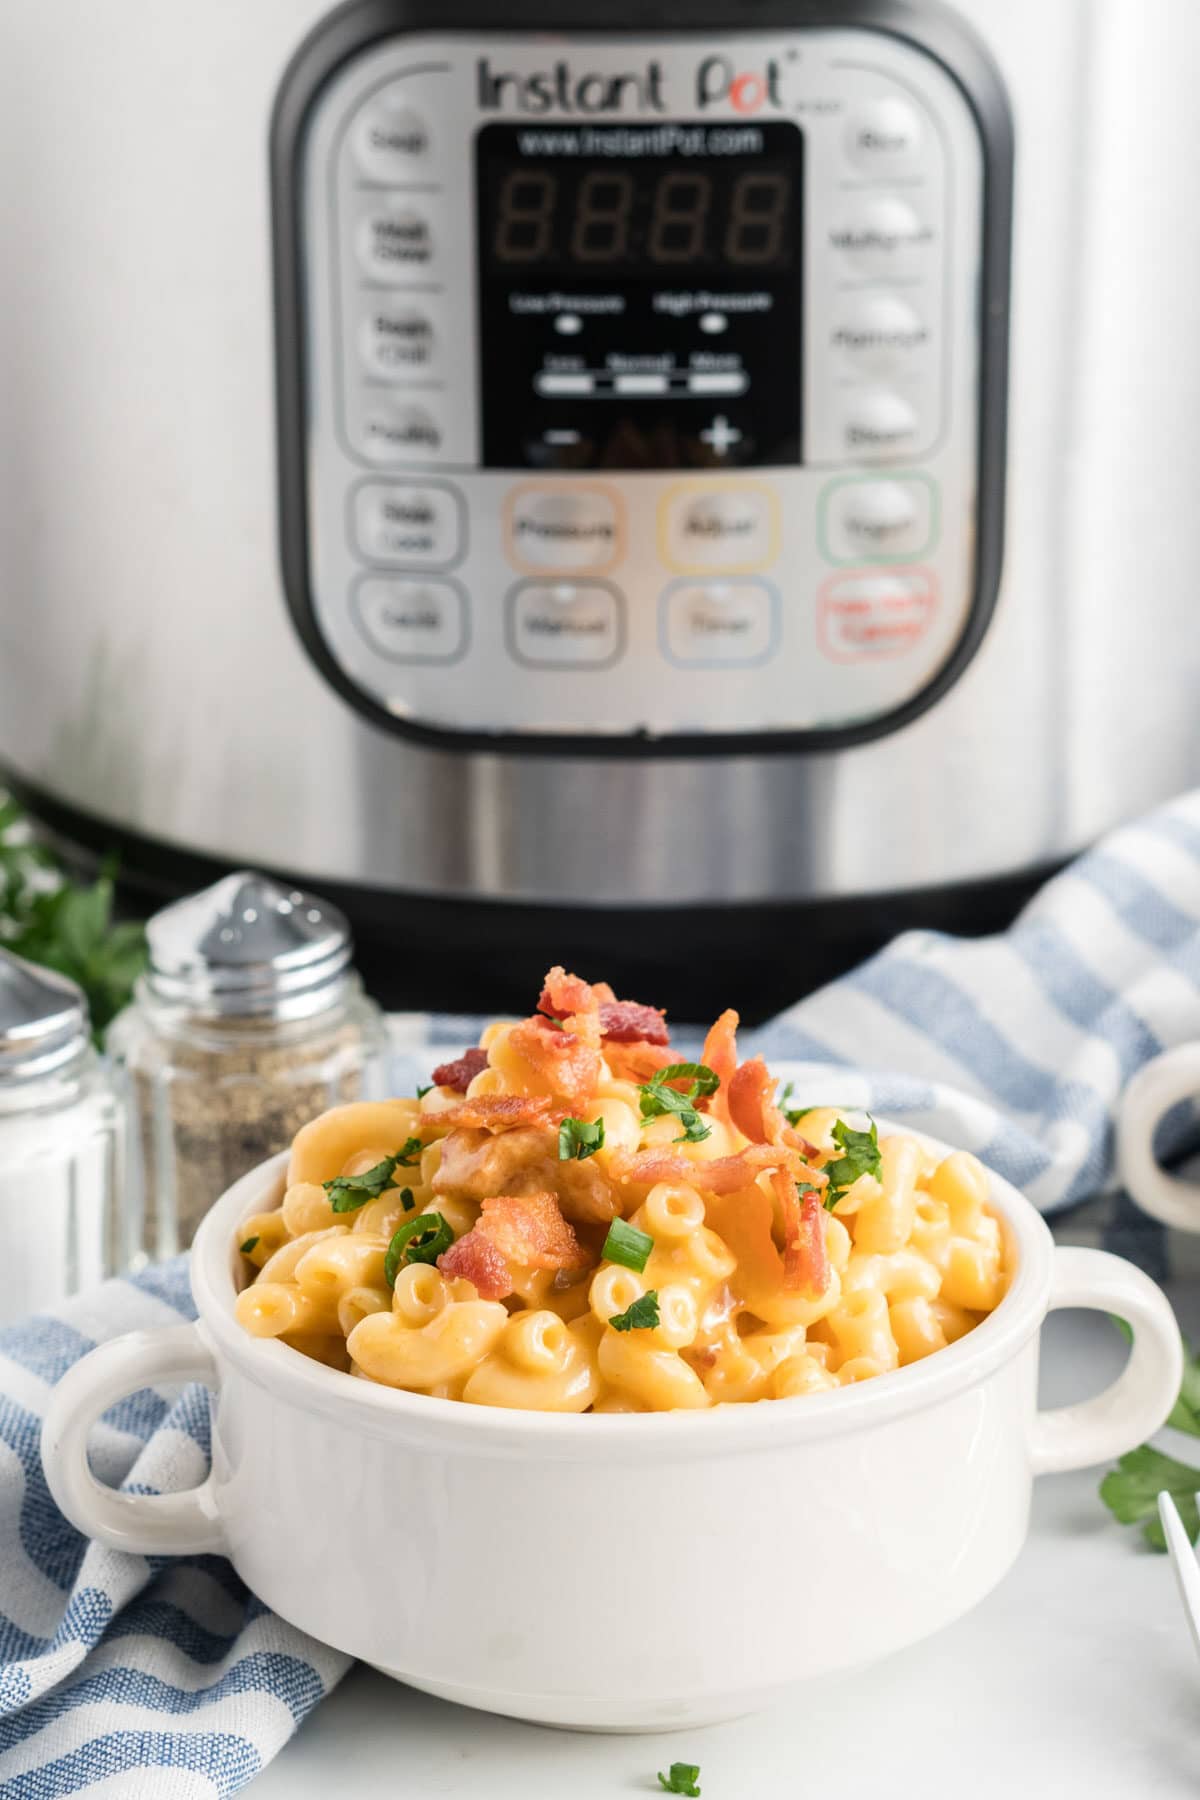 Instant pot mac and cheese in a white bowl